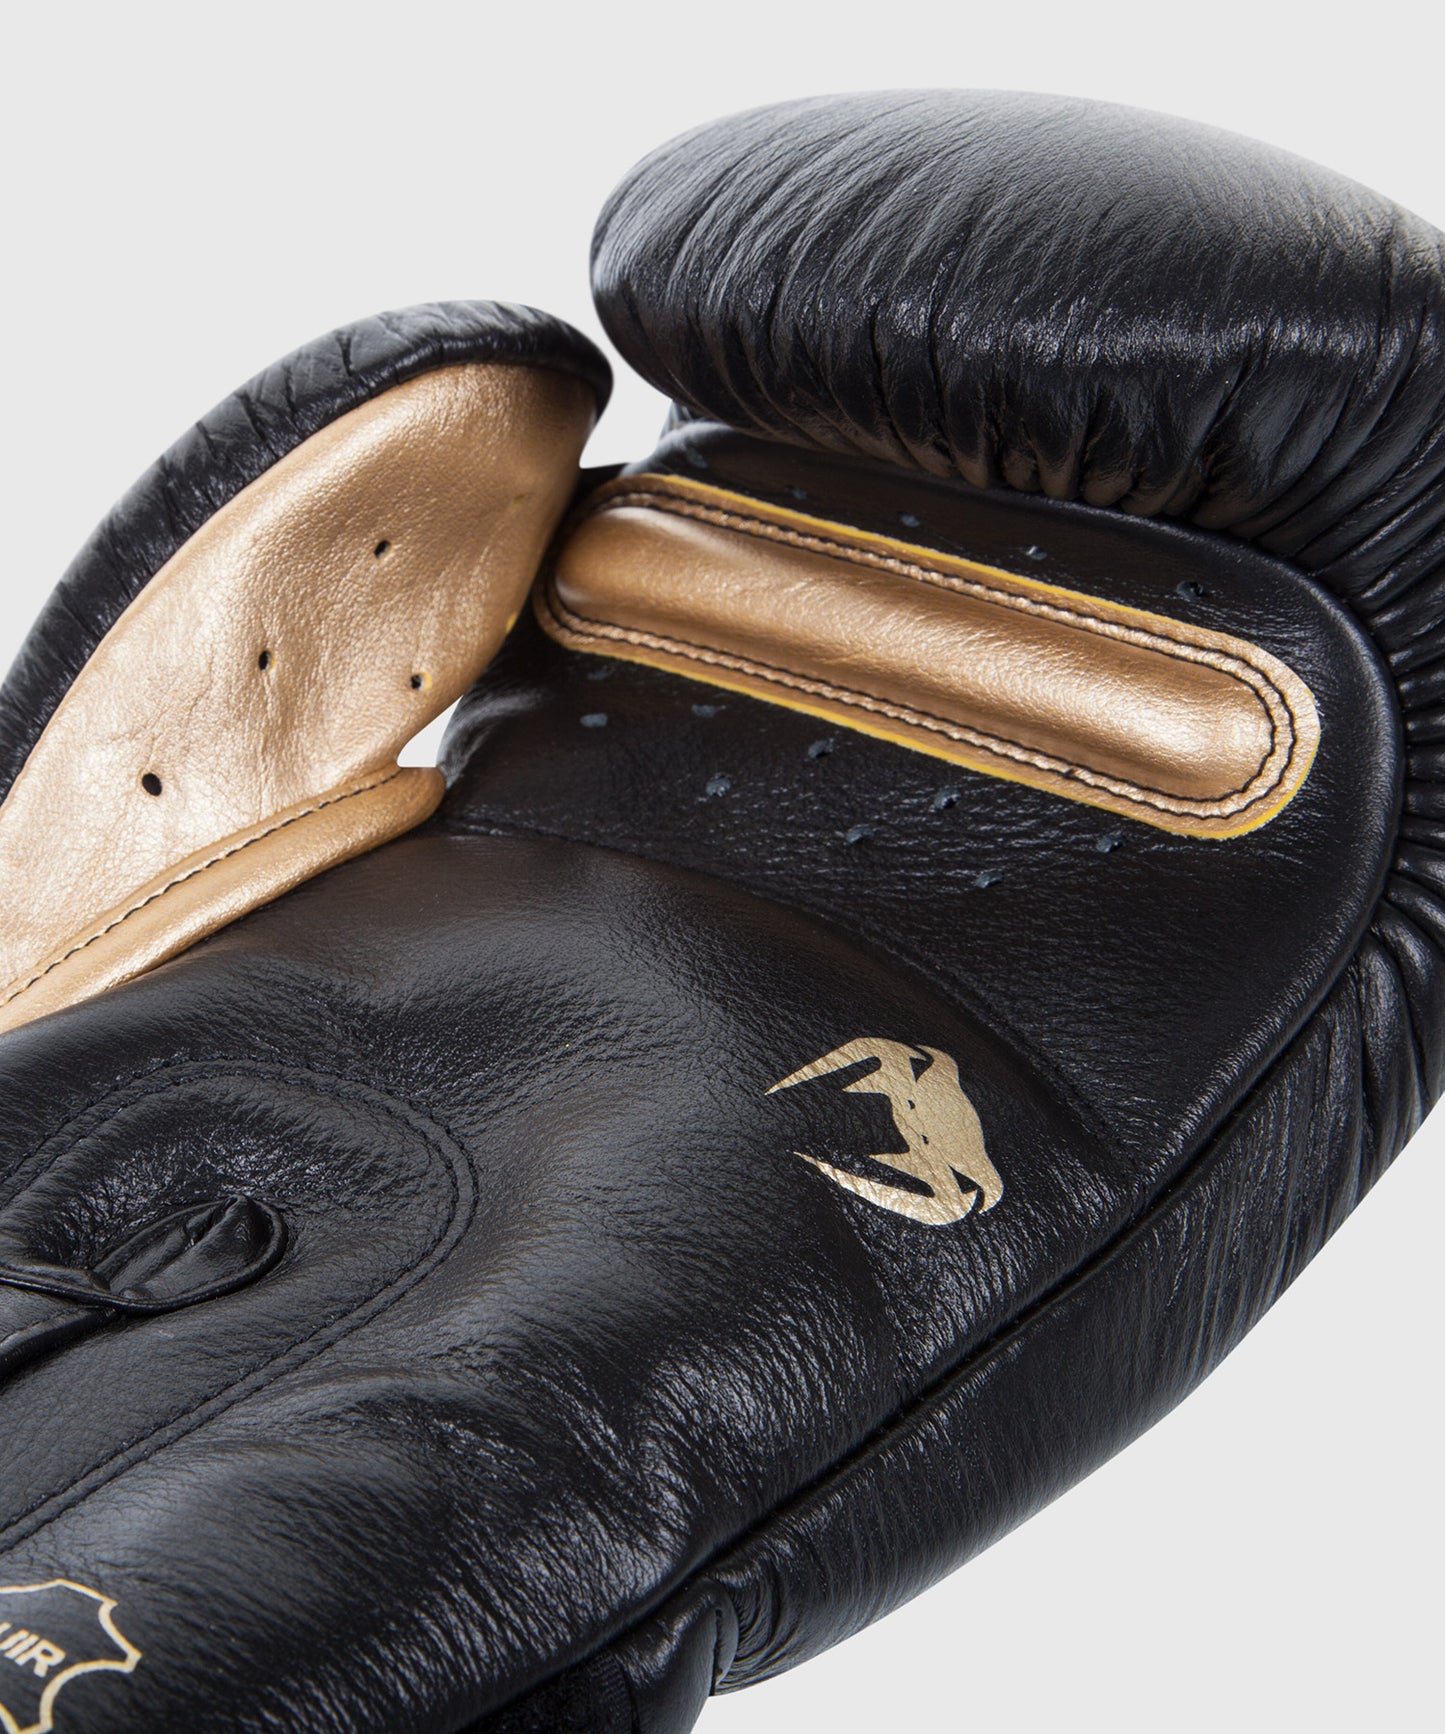 Venum Giant 3.0 Boxing Gloves - Nappa Leather - Black/Gold